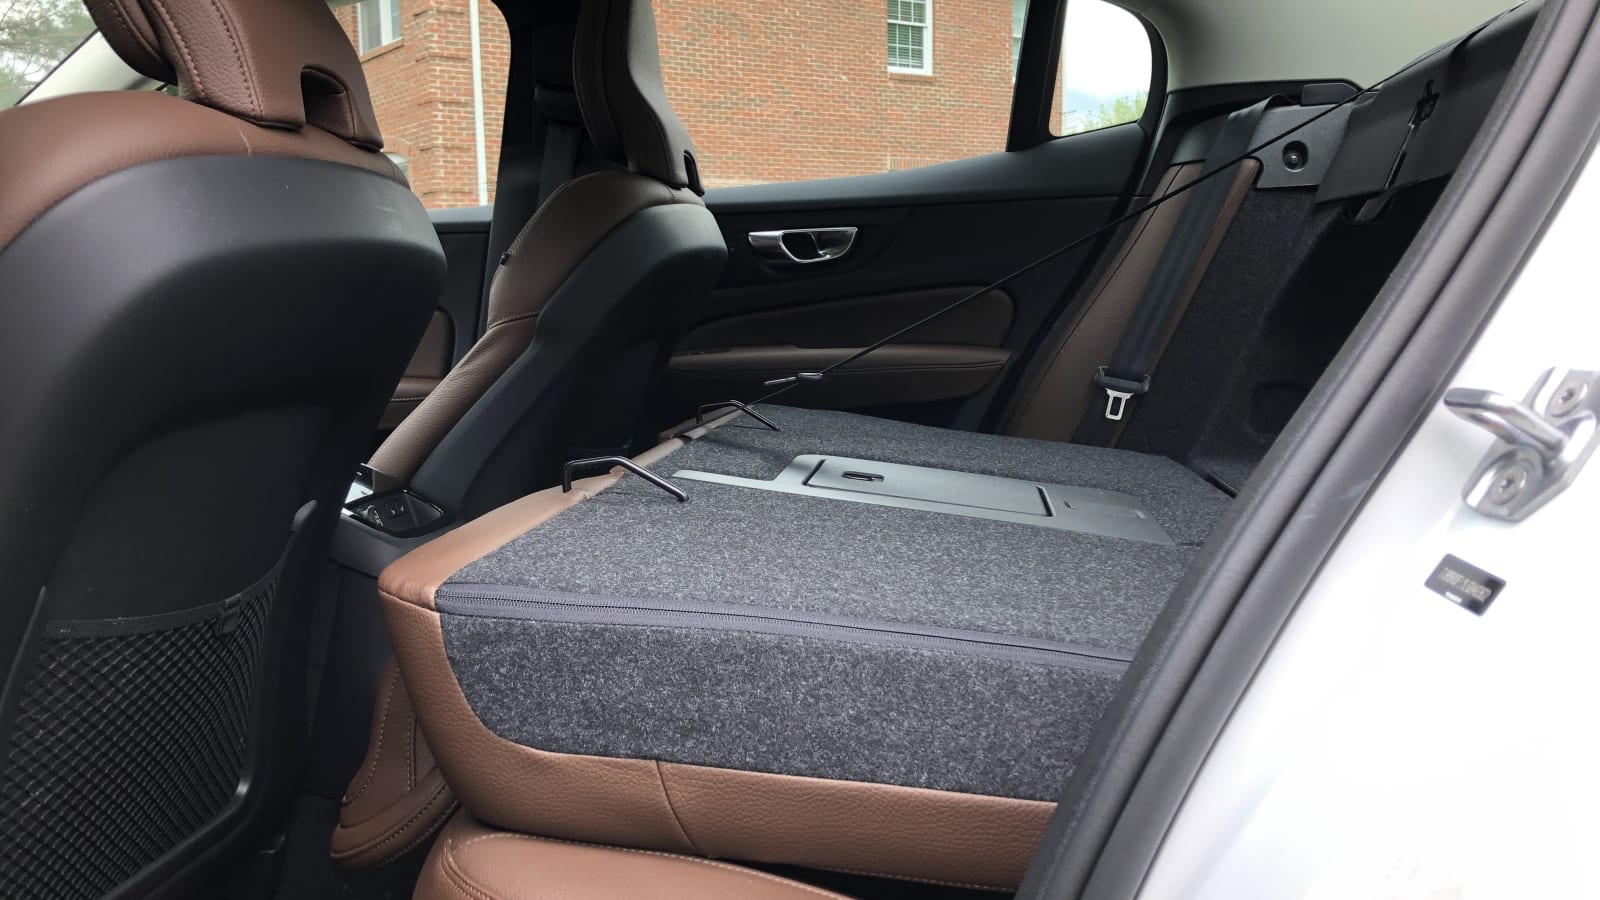 2020 Volvo S60 T8 Luggage Test | Long-term utility update 16 Rice Tire